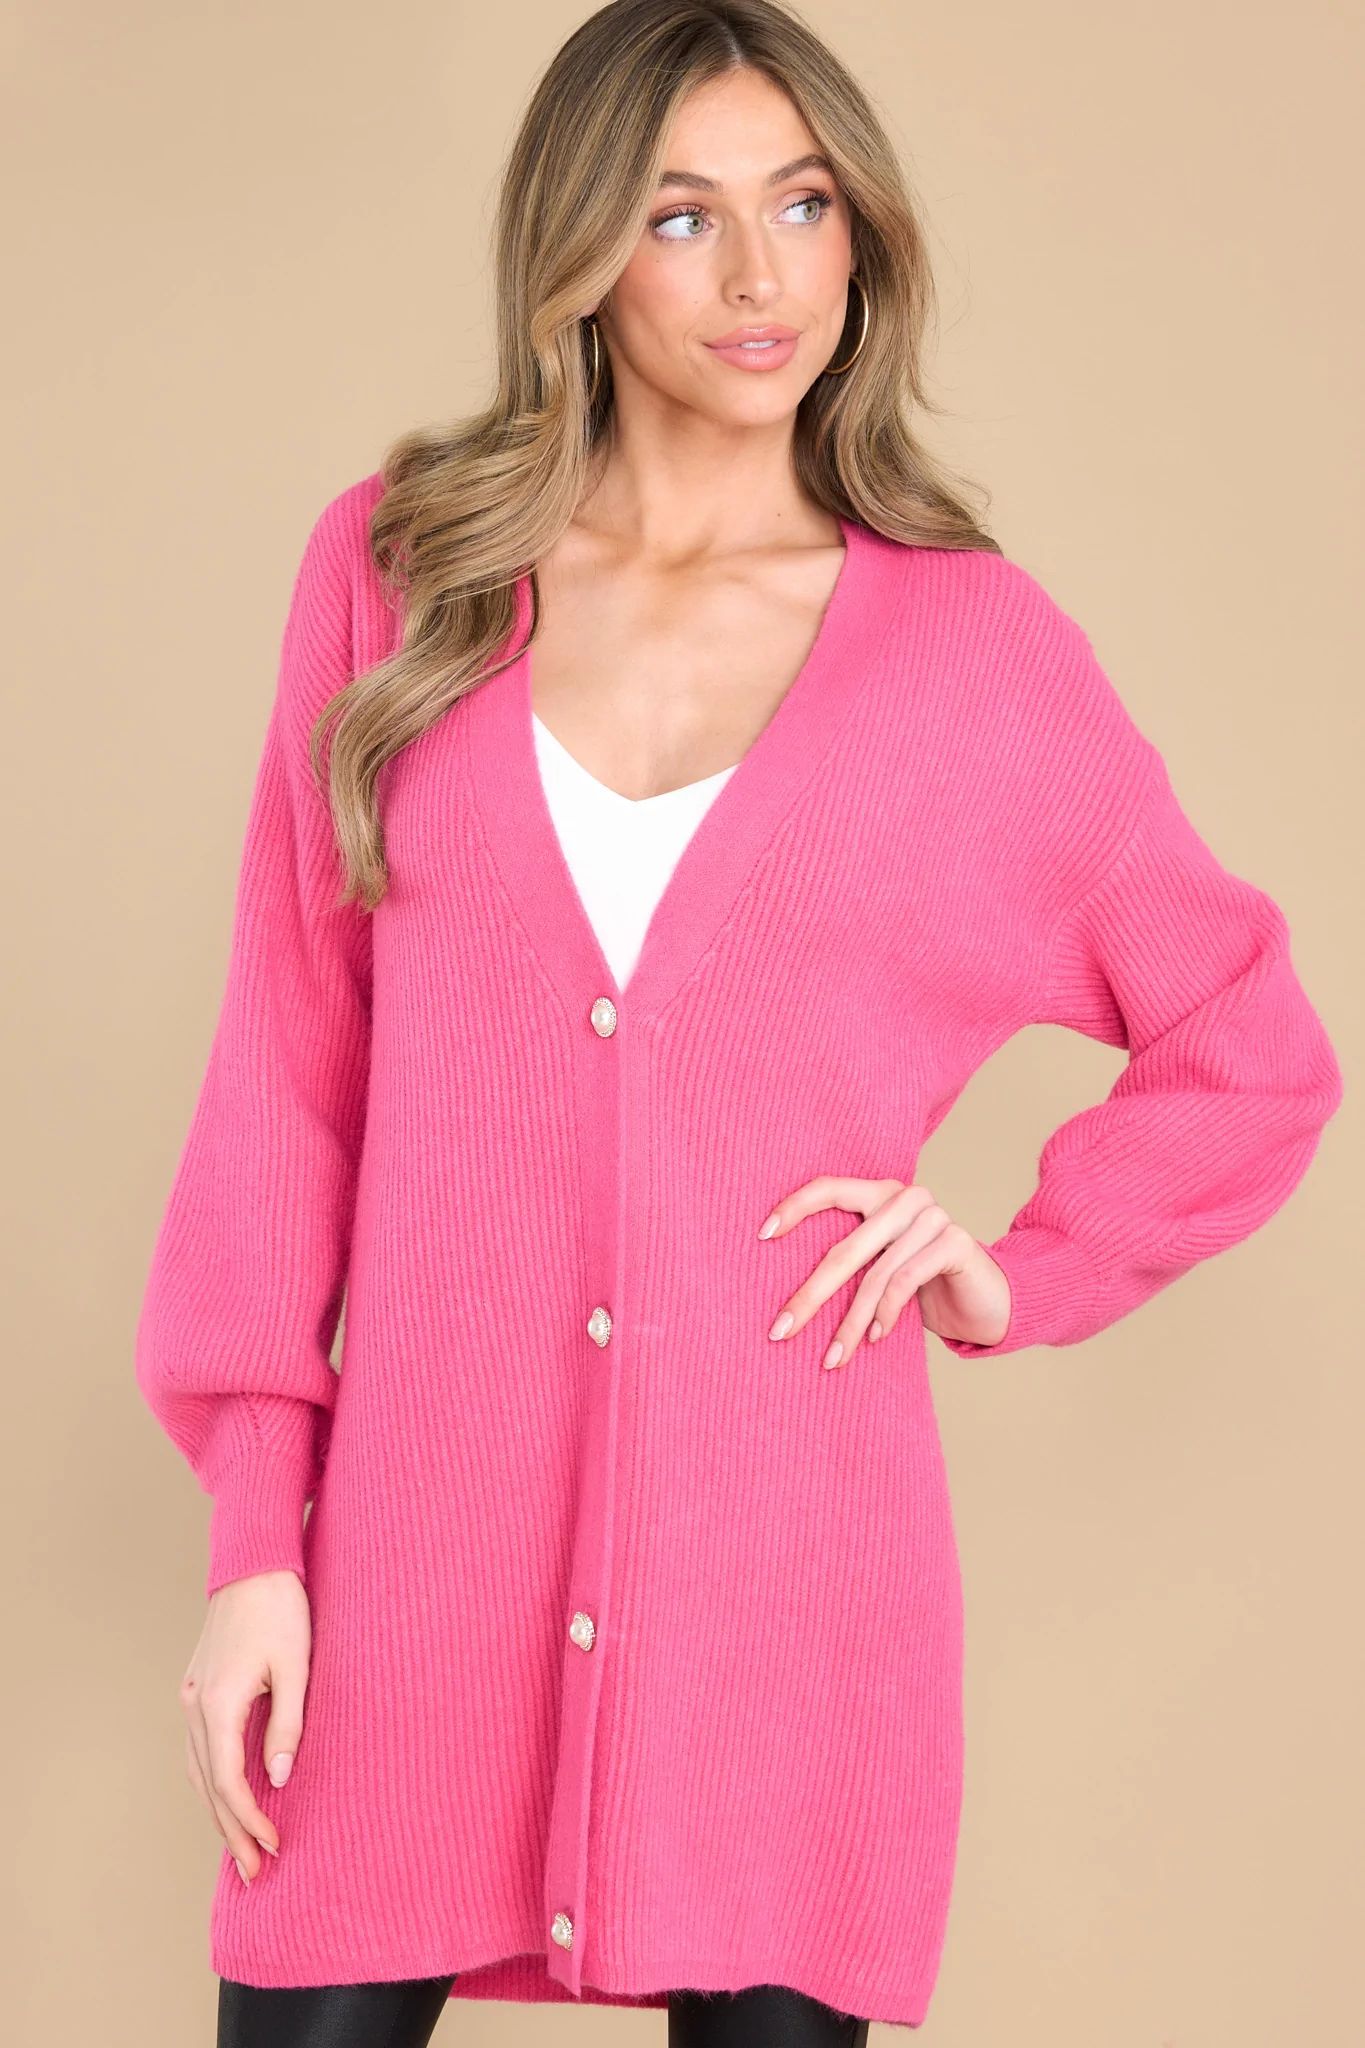 All Buttoned Up Hot Pink Cardigan | Red Dress 